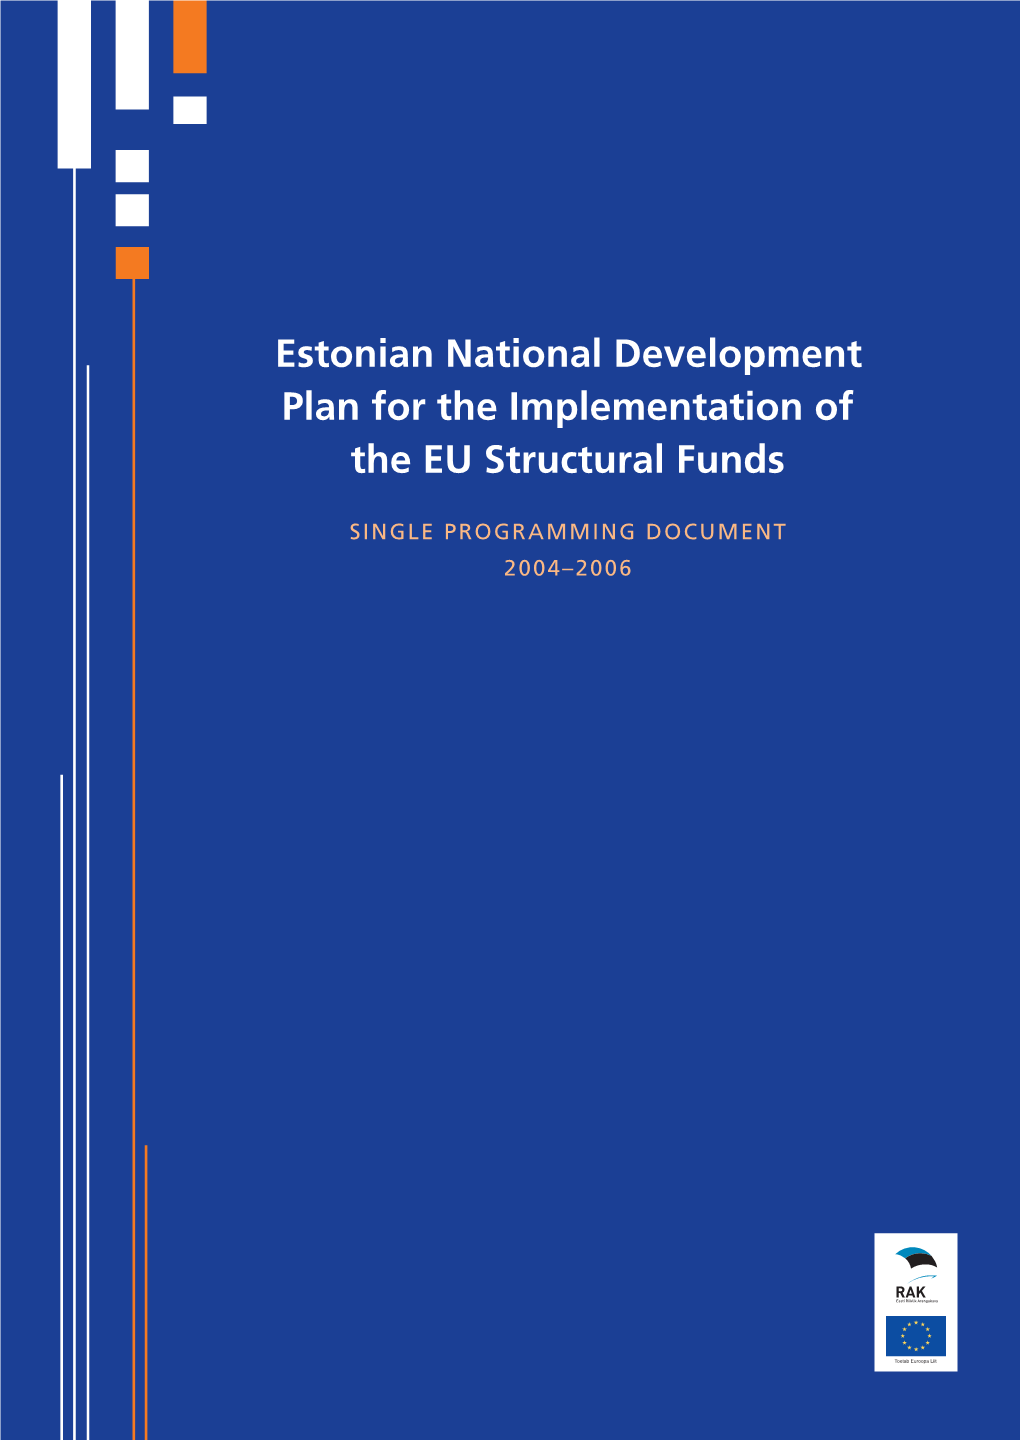 Estonian National Development Plan for the Implementation of the EU Structural Funds